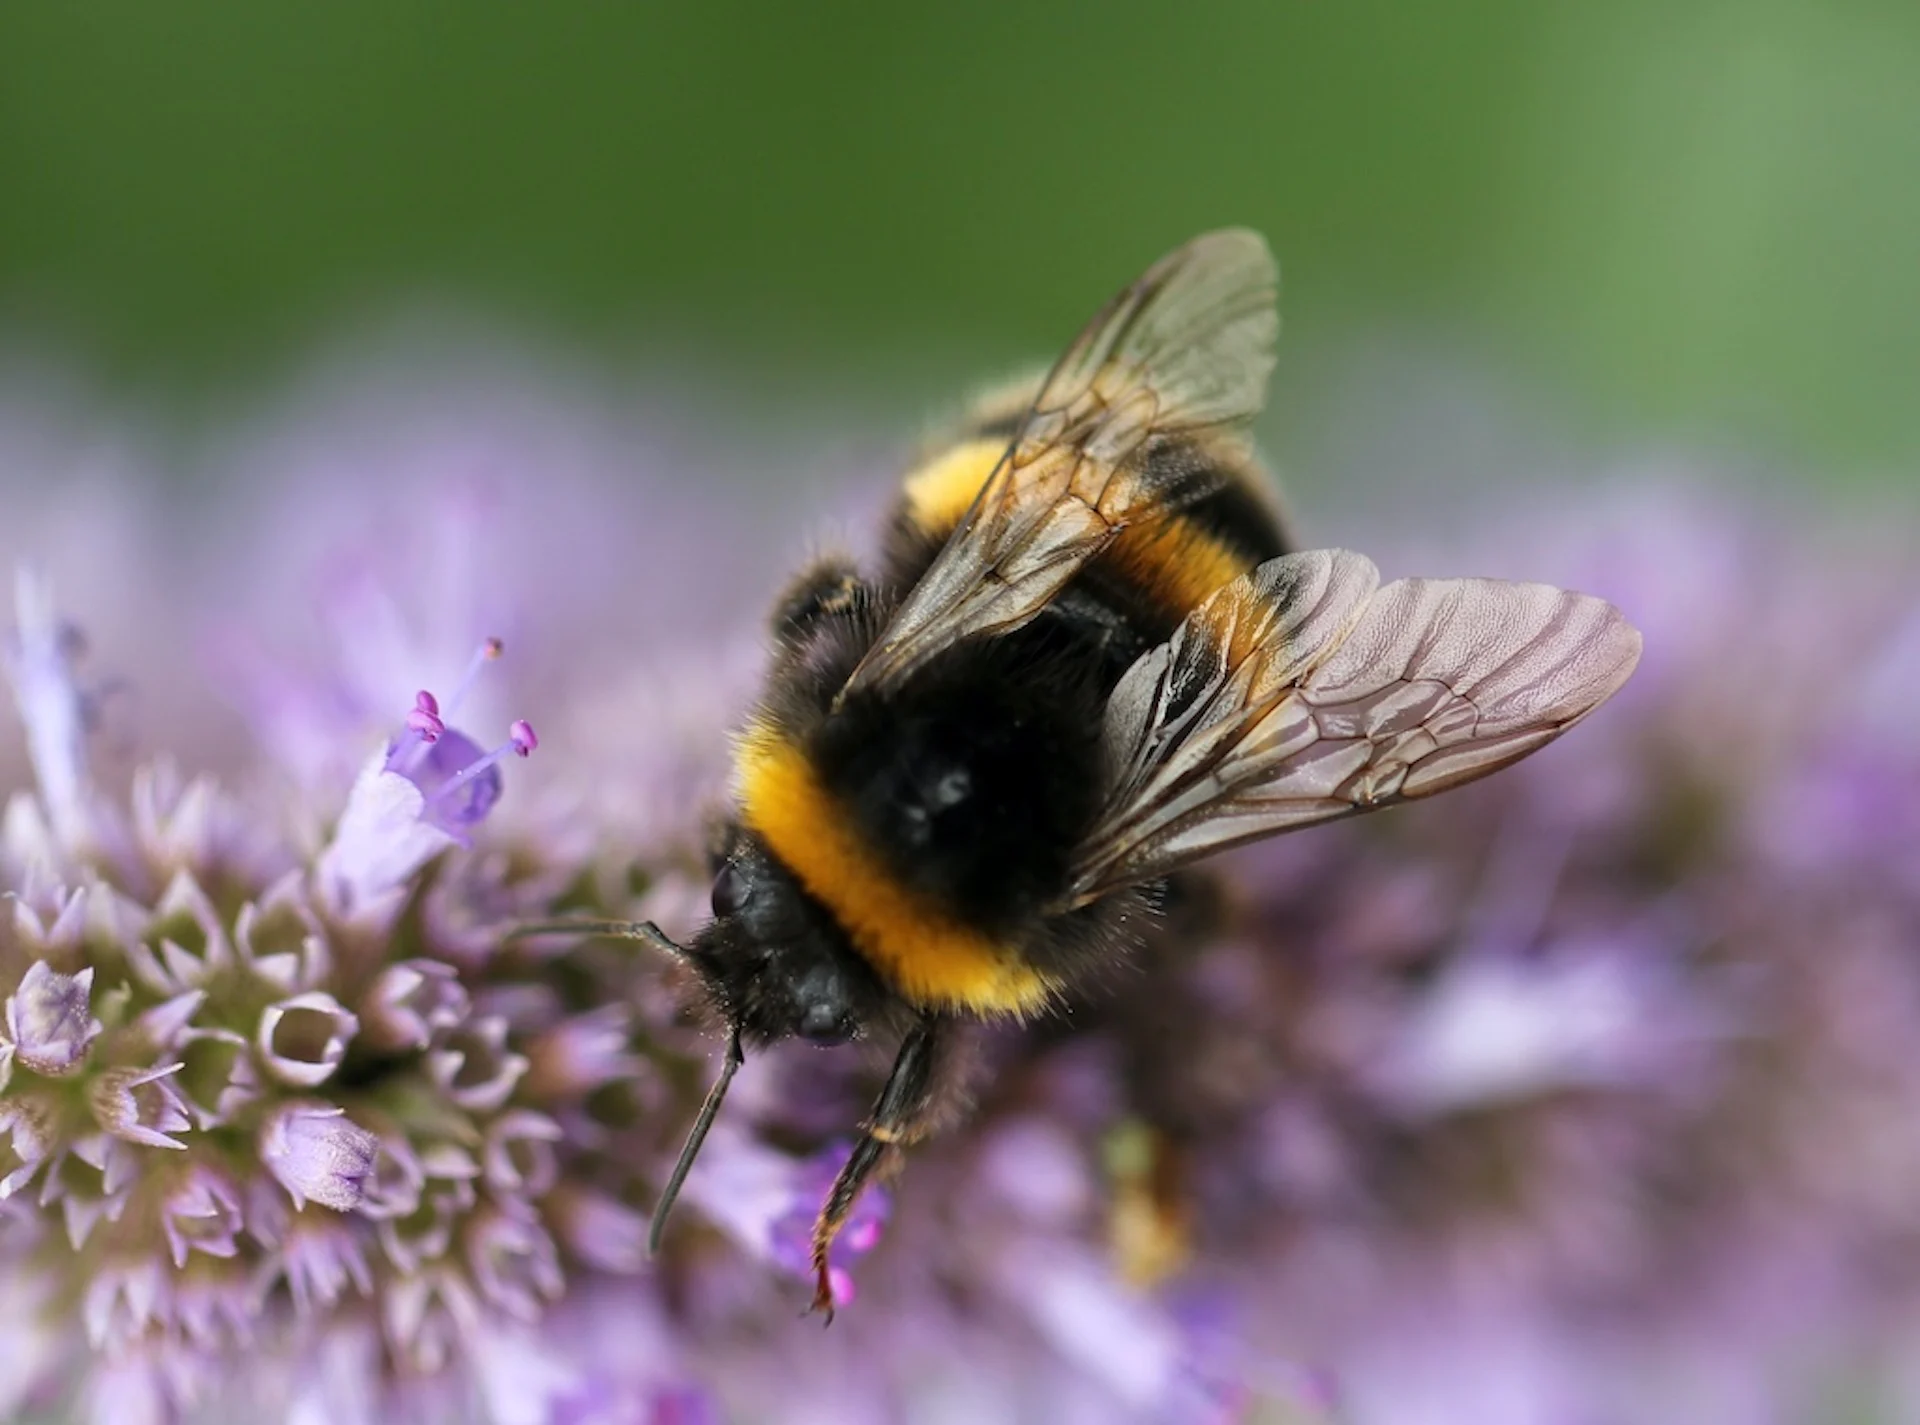 Experts give advice on helping bees in and out of cities